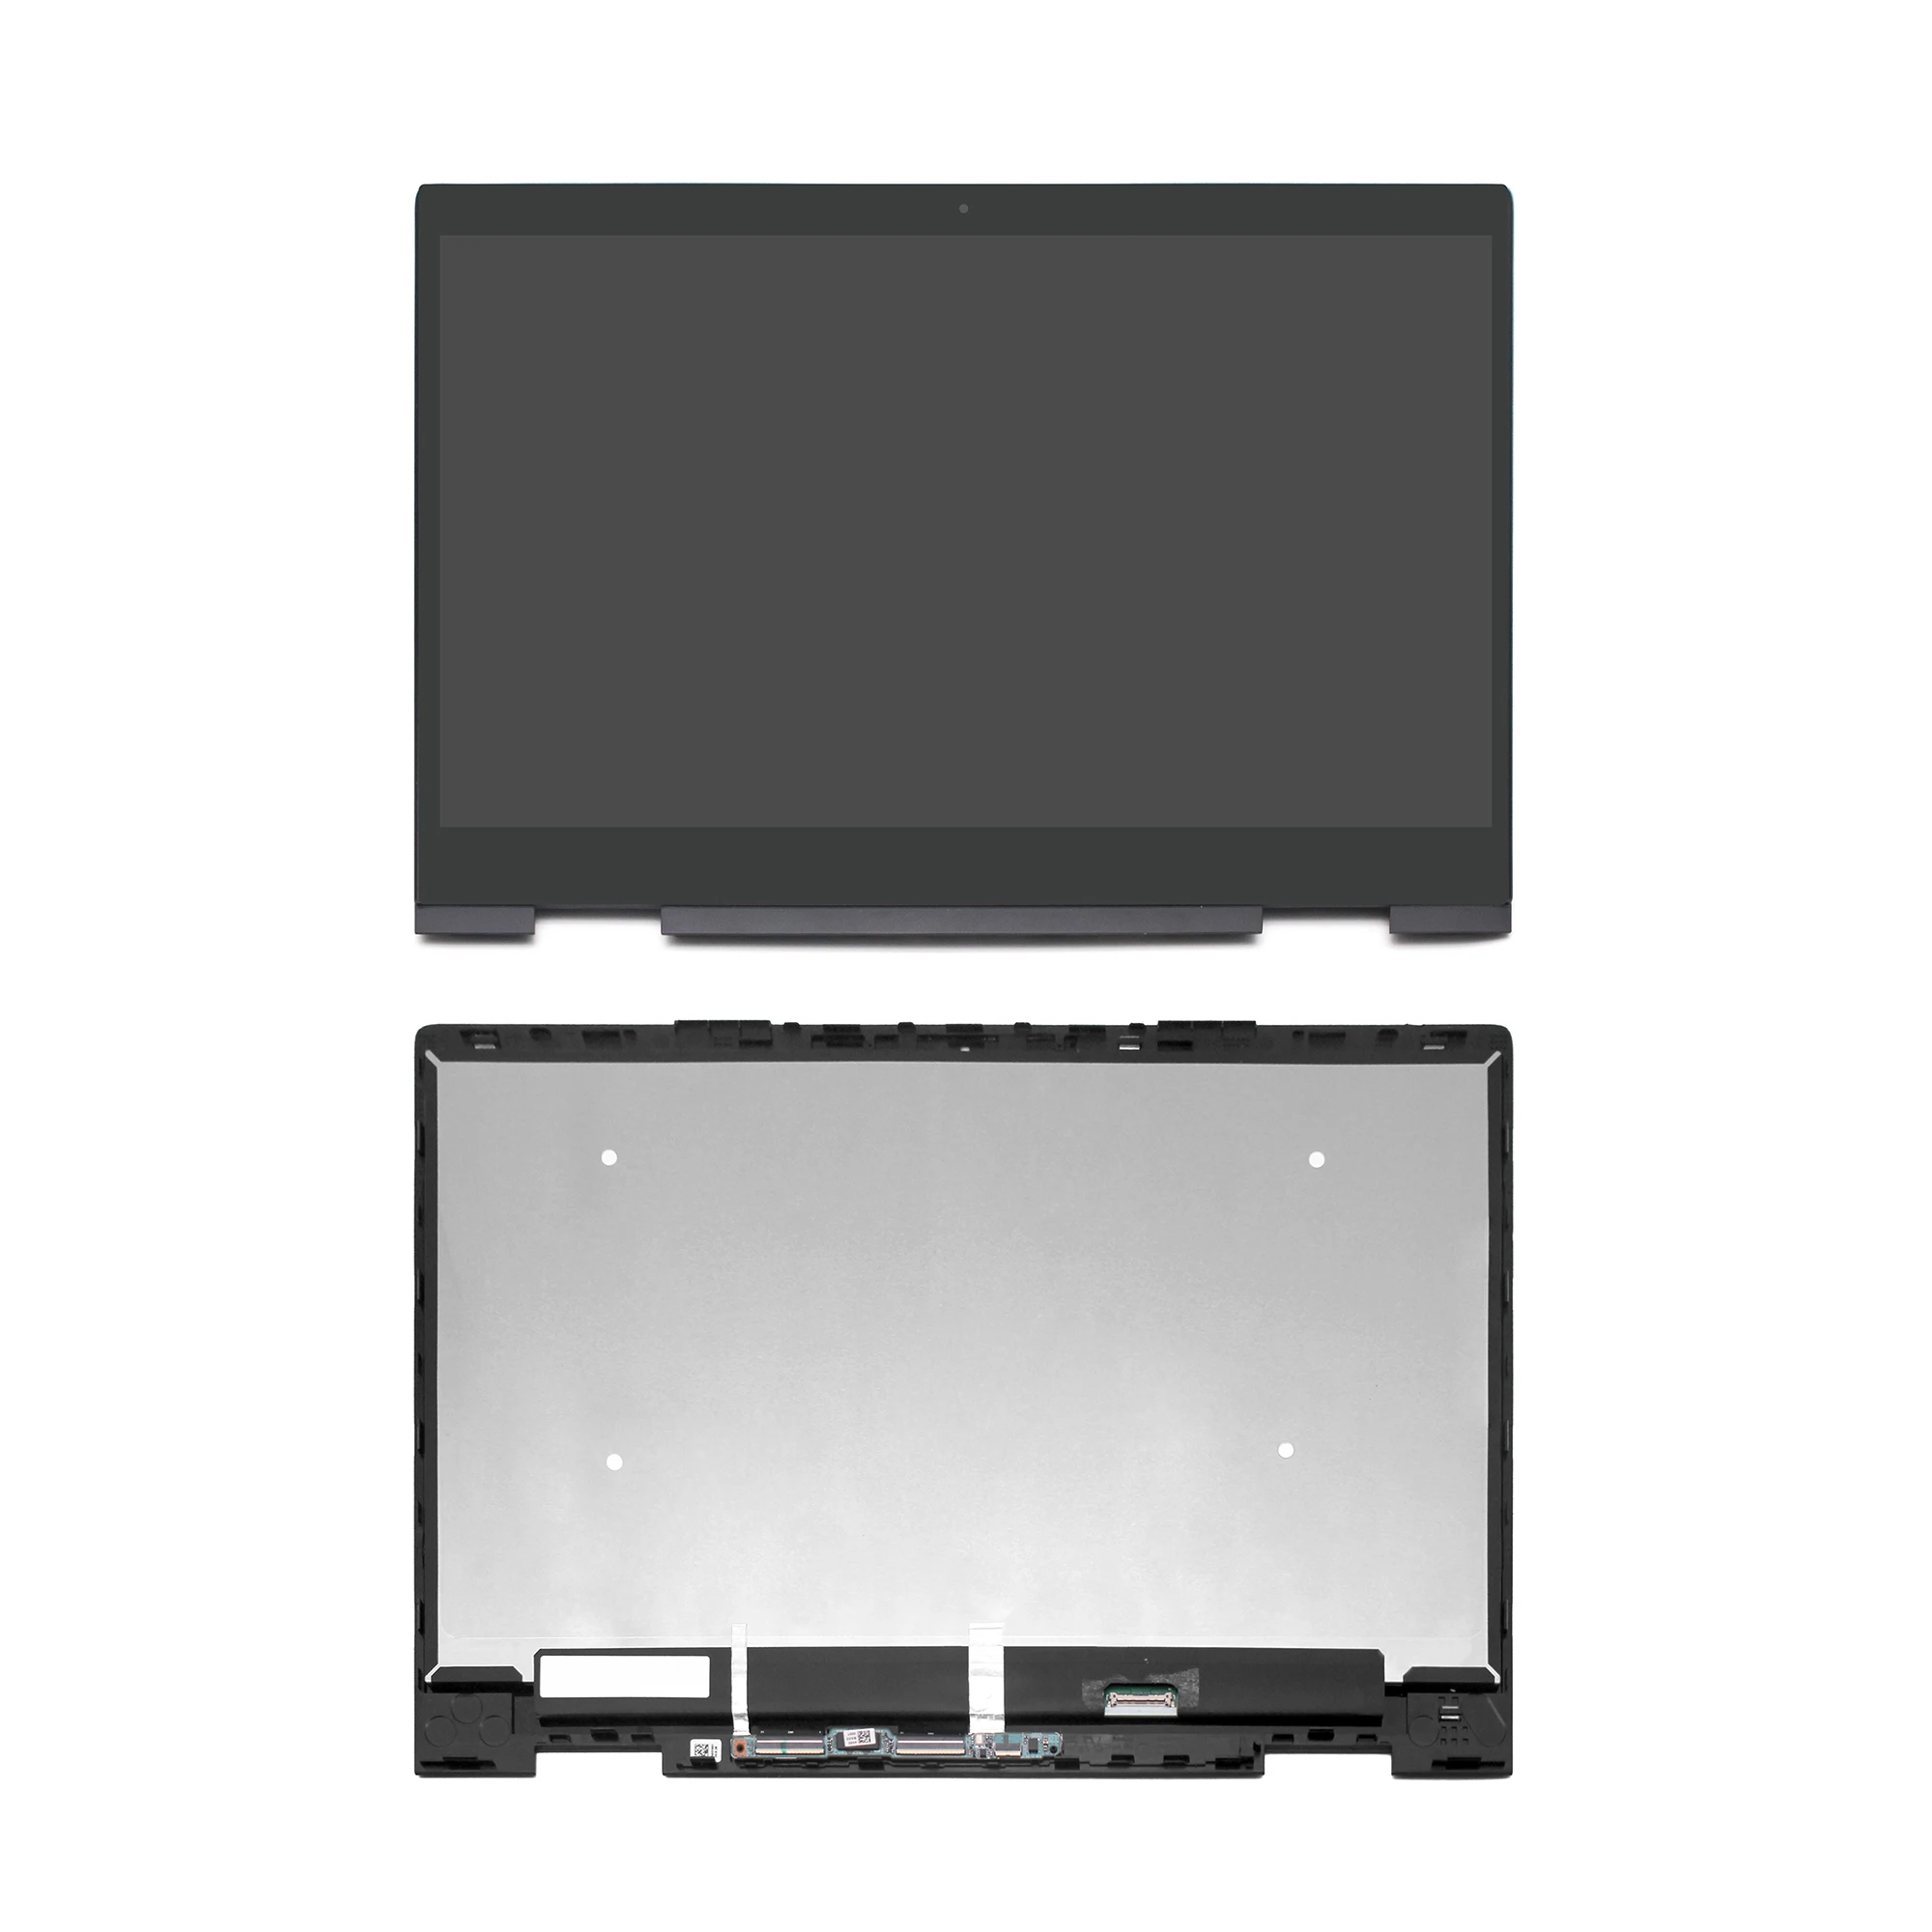 LCD Touch Screen Digitizer Assembly With Bezel For HP Envy x360 15-bp 15-bp000nx 15-bp000ur 15-bp001nc 15-bp001ne 15-bp001nf